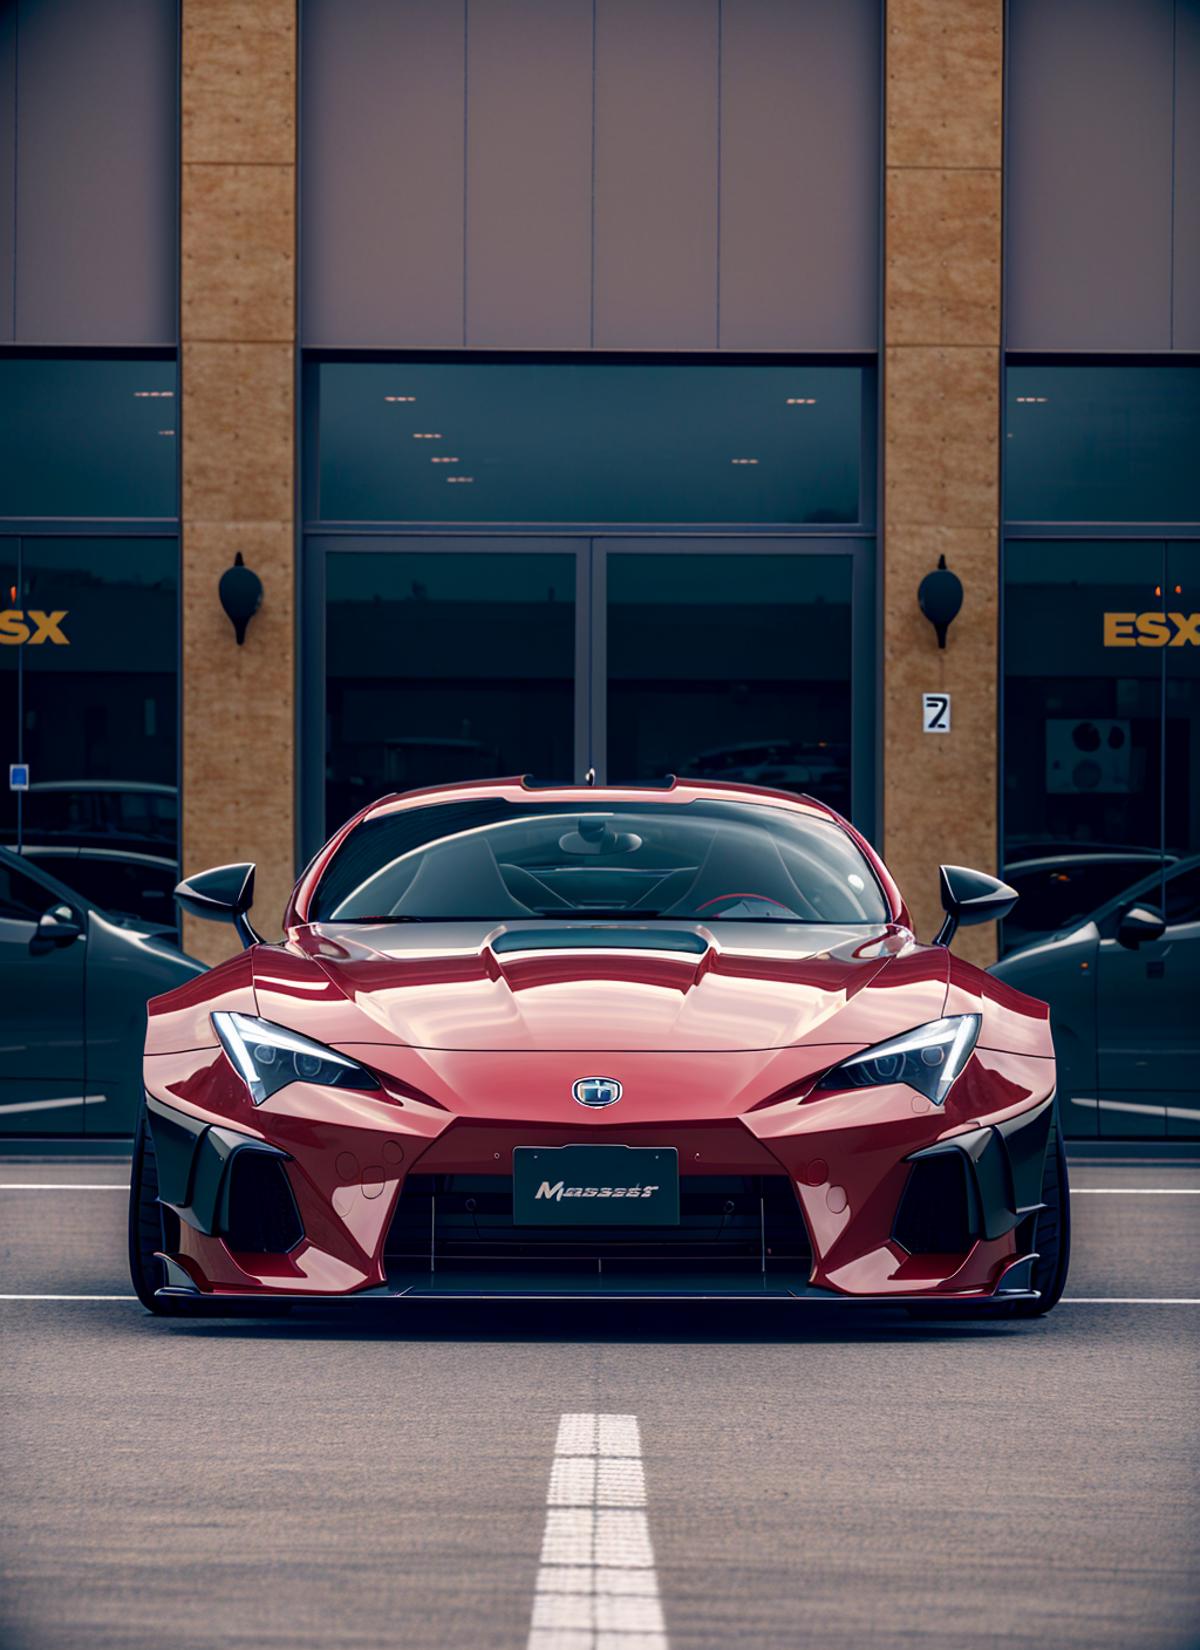 Widebody Cars image by fallenL